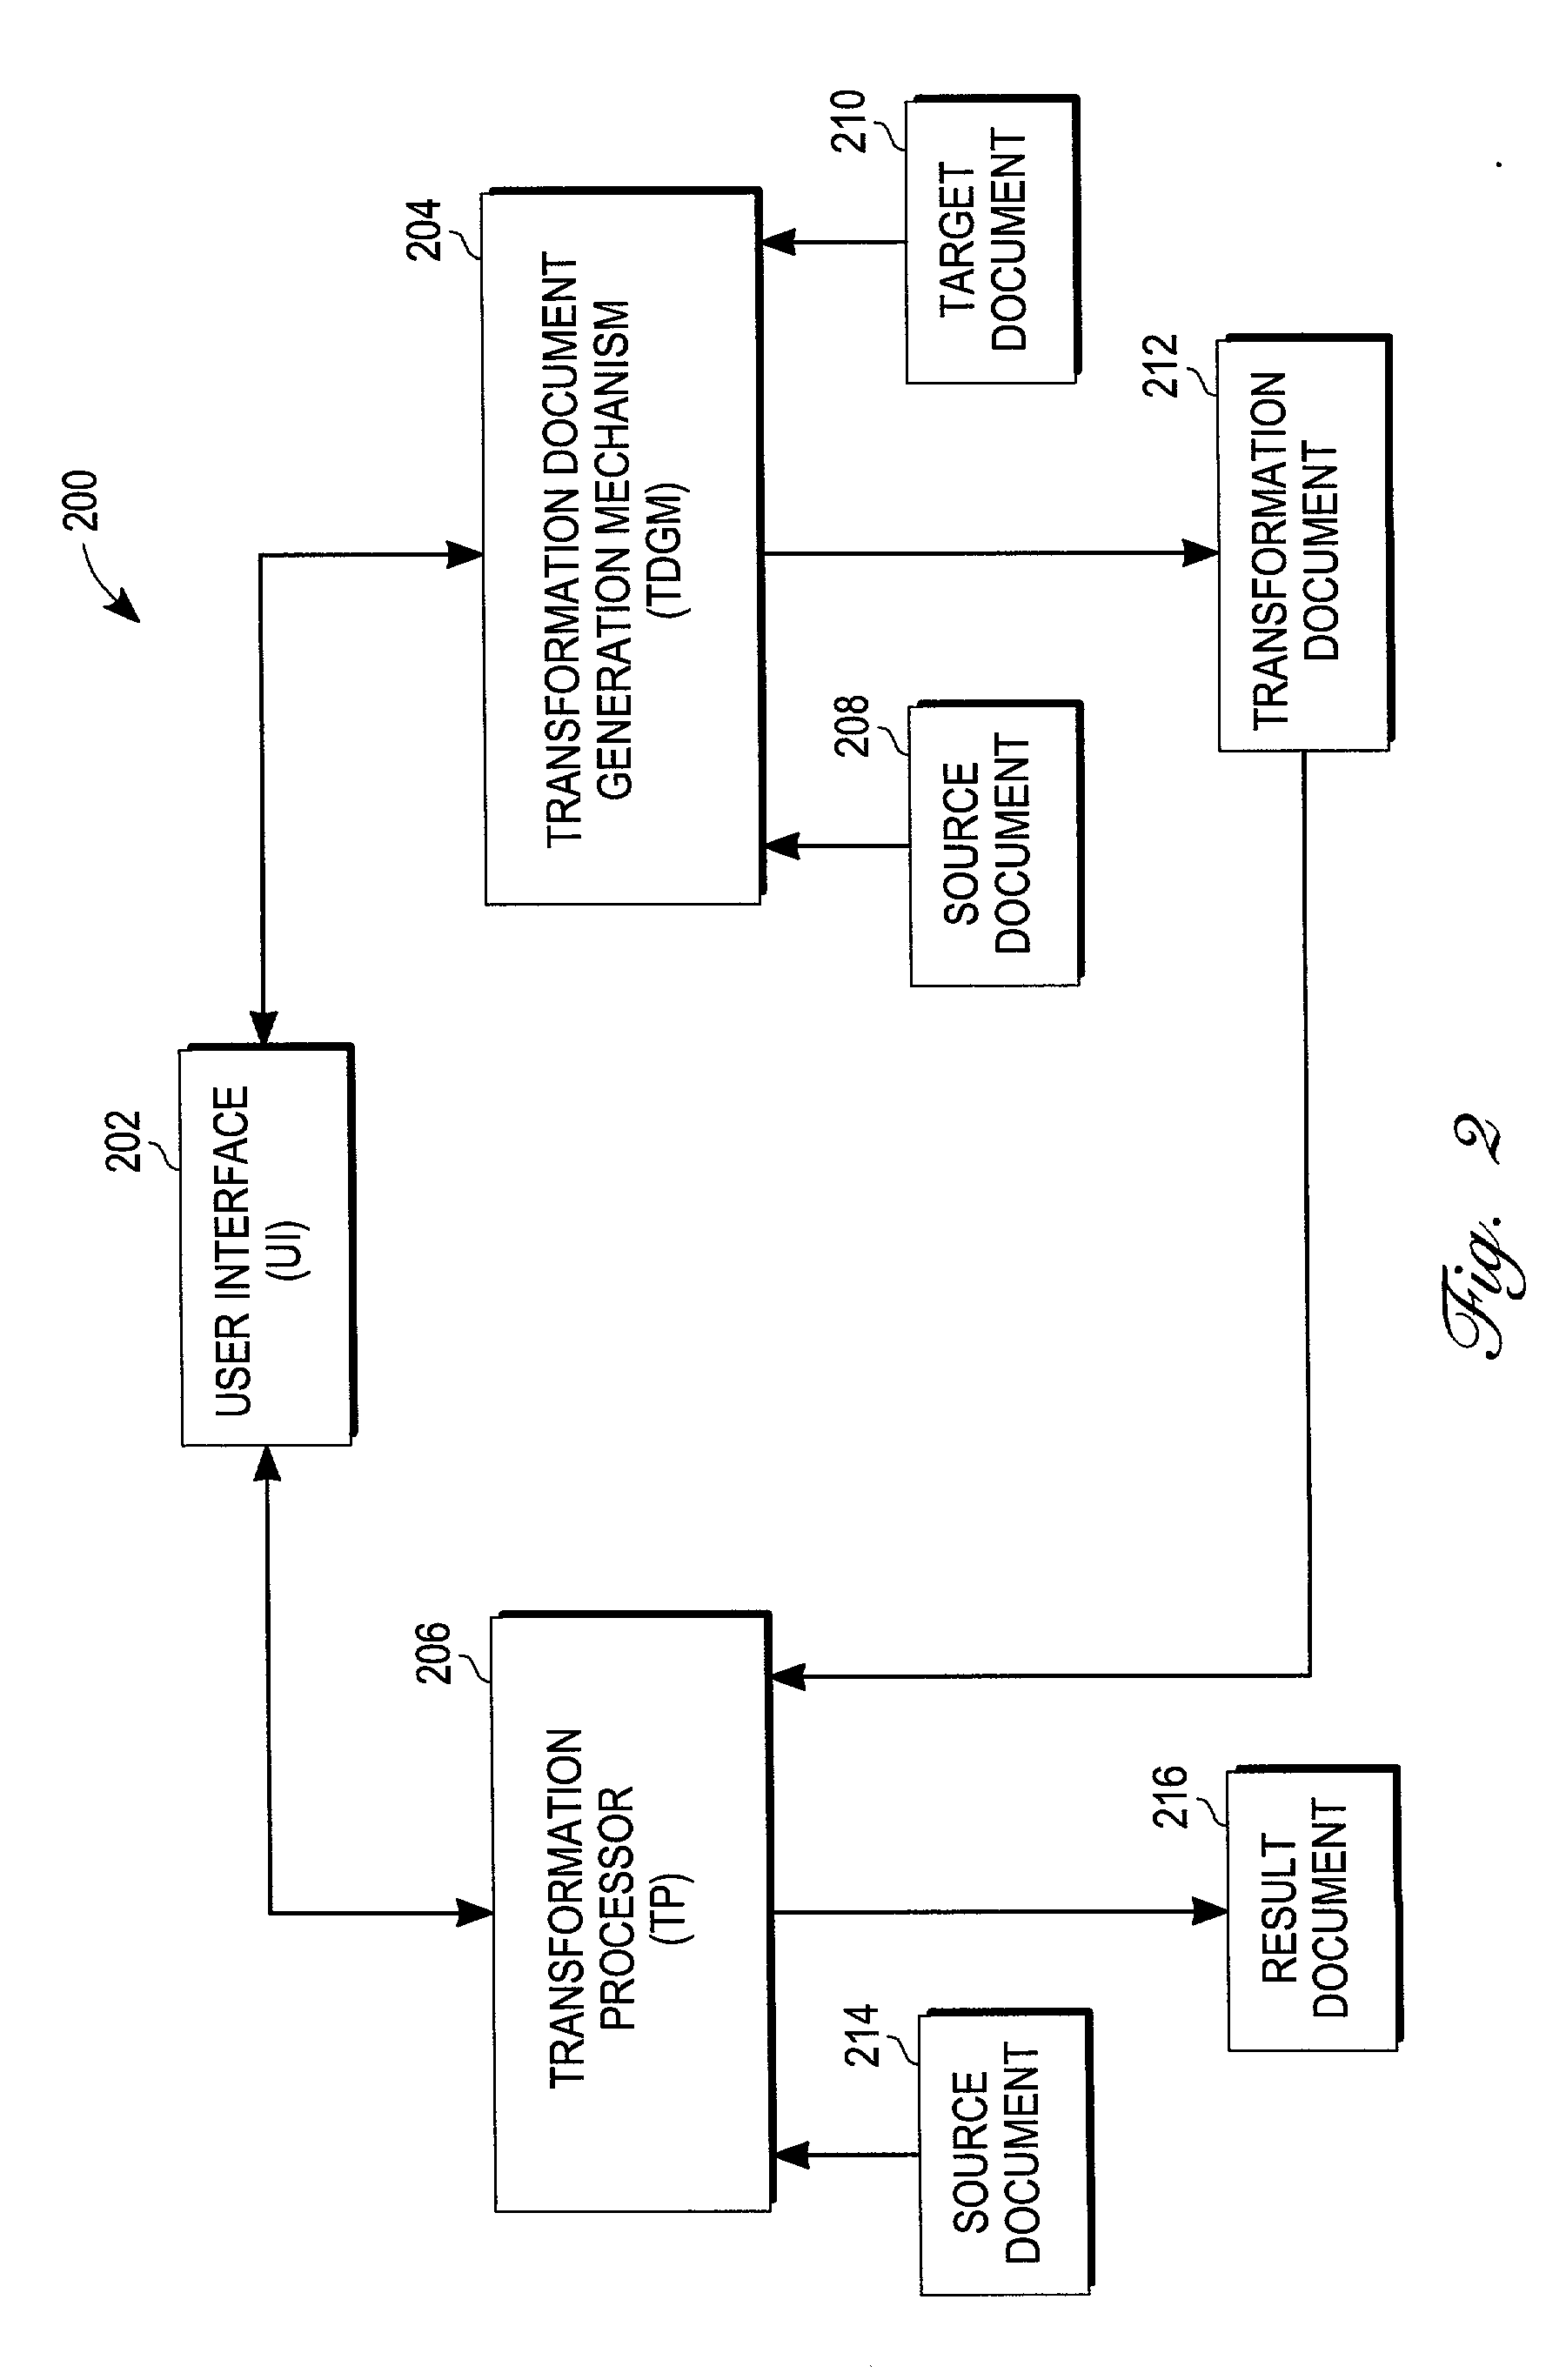 Enhanced mechanism for automatically generating a transformation document